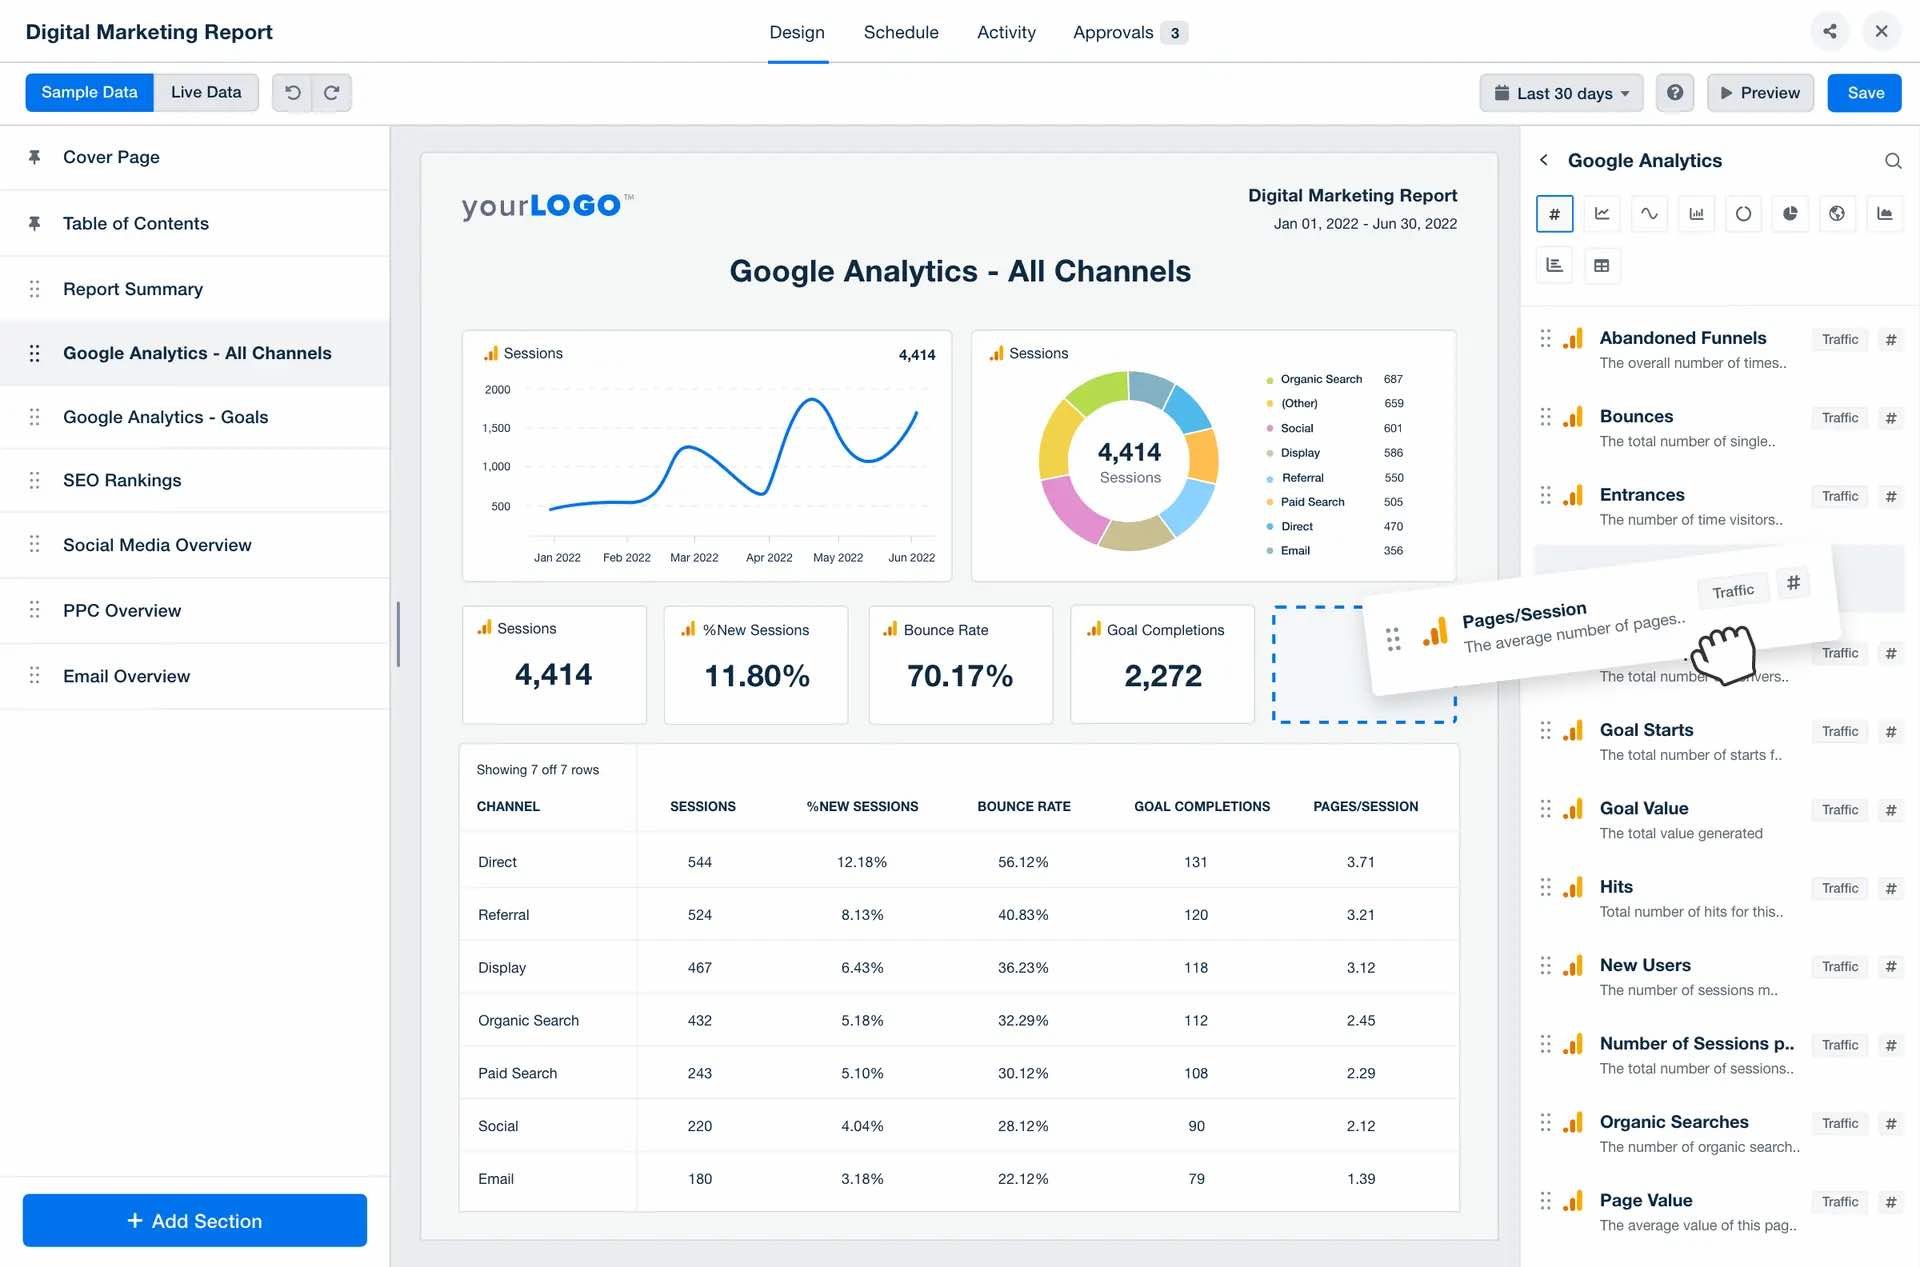 seo automation AgencyAnalytics.jpg?width=1920&height=1267&name=seo automation AgencyAnalytics - The Marketer’s Complete Guide to SEO Automation